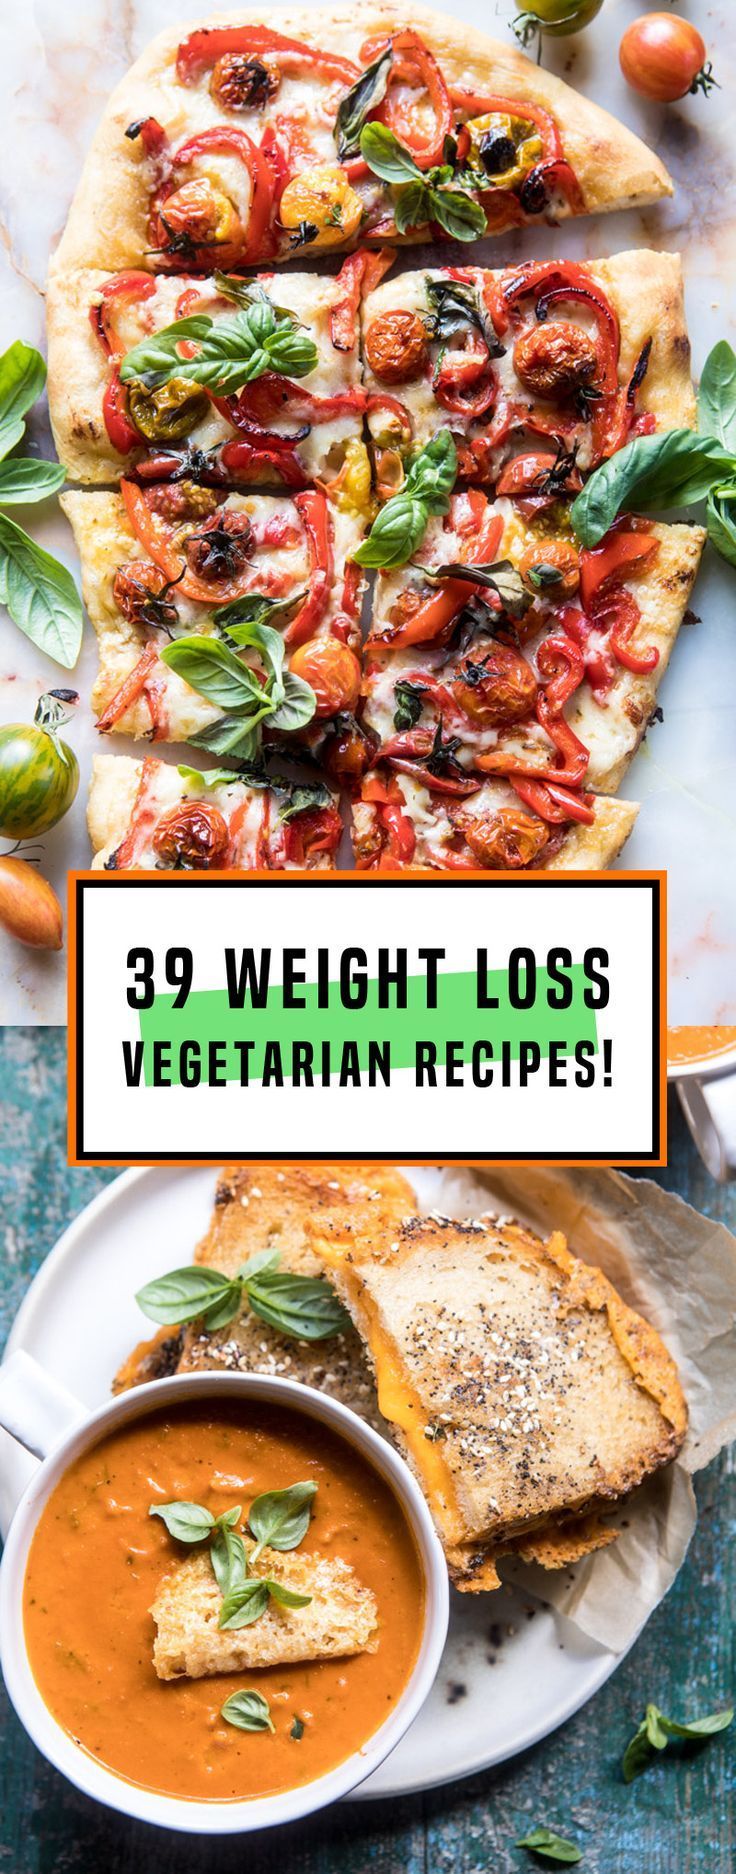 39 Vegetarian Weight Loss Recipes That Are Healthy And Delicious -   14 healthy recipes weight loss cooking ideas